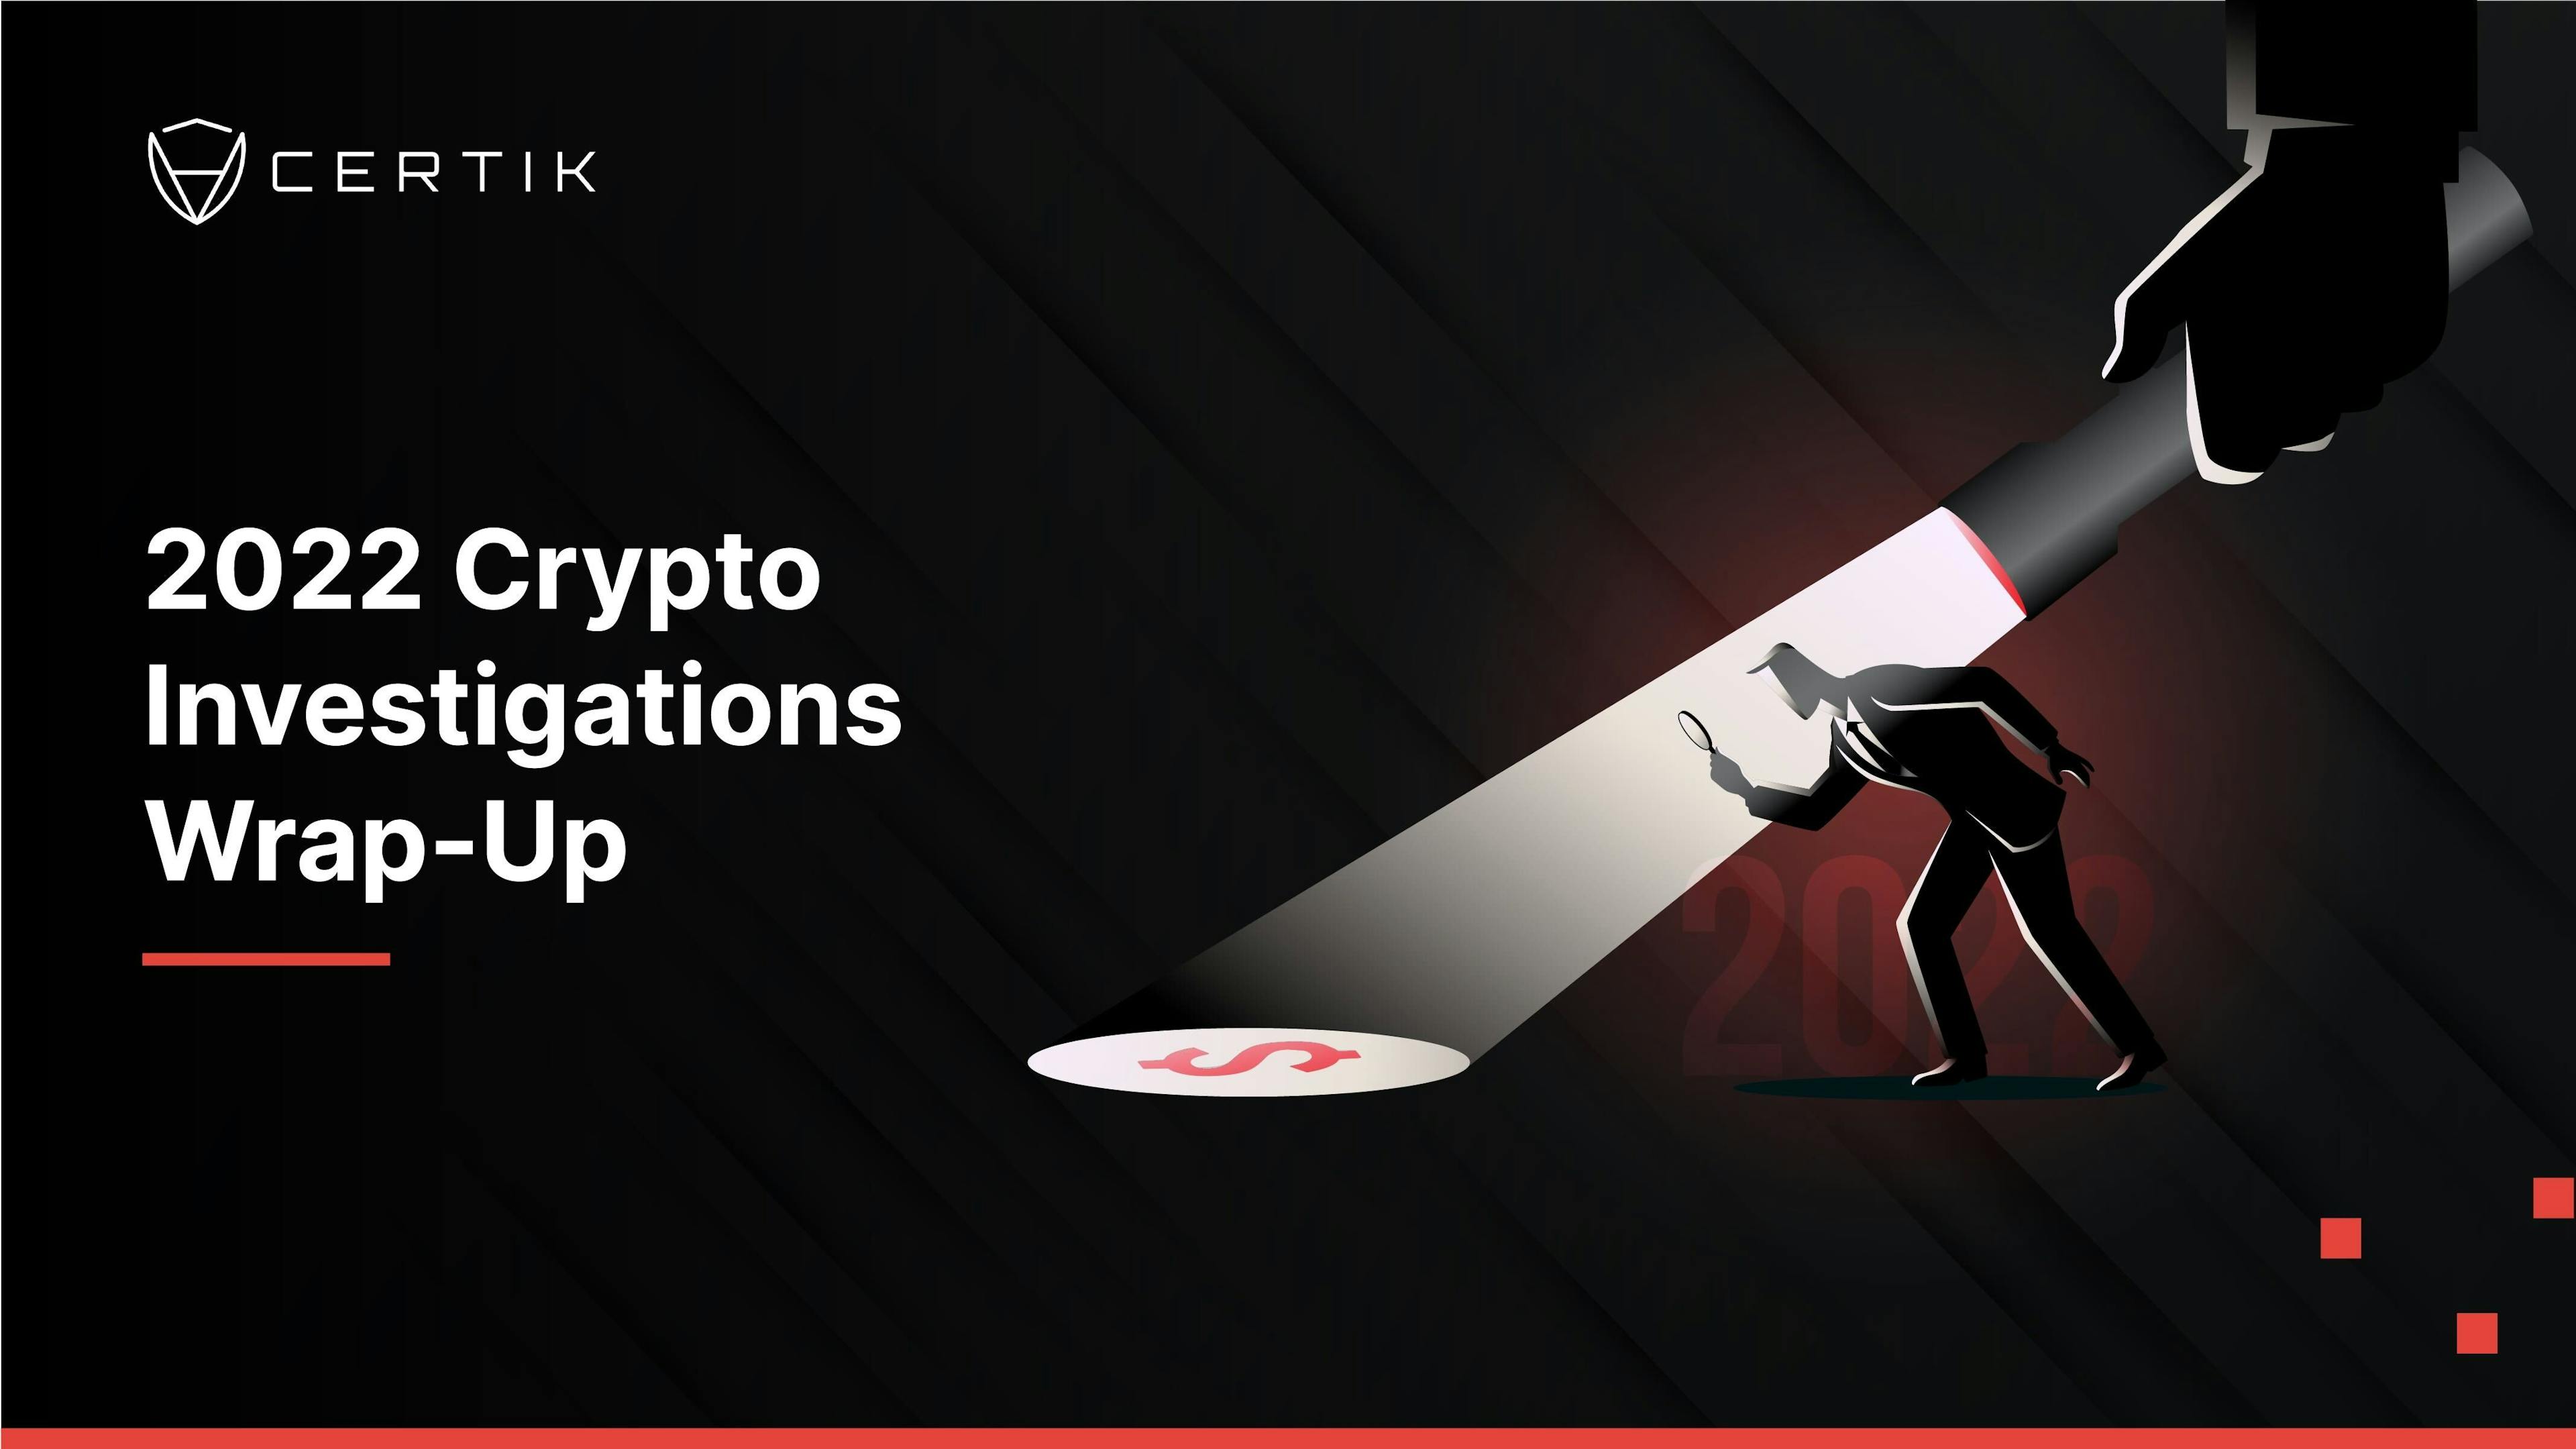 2022 Crypto Investigations Wrap-Up